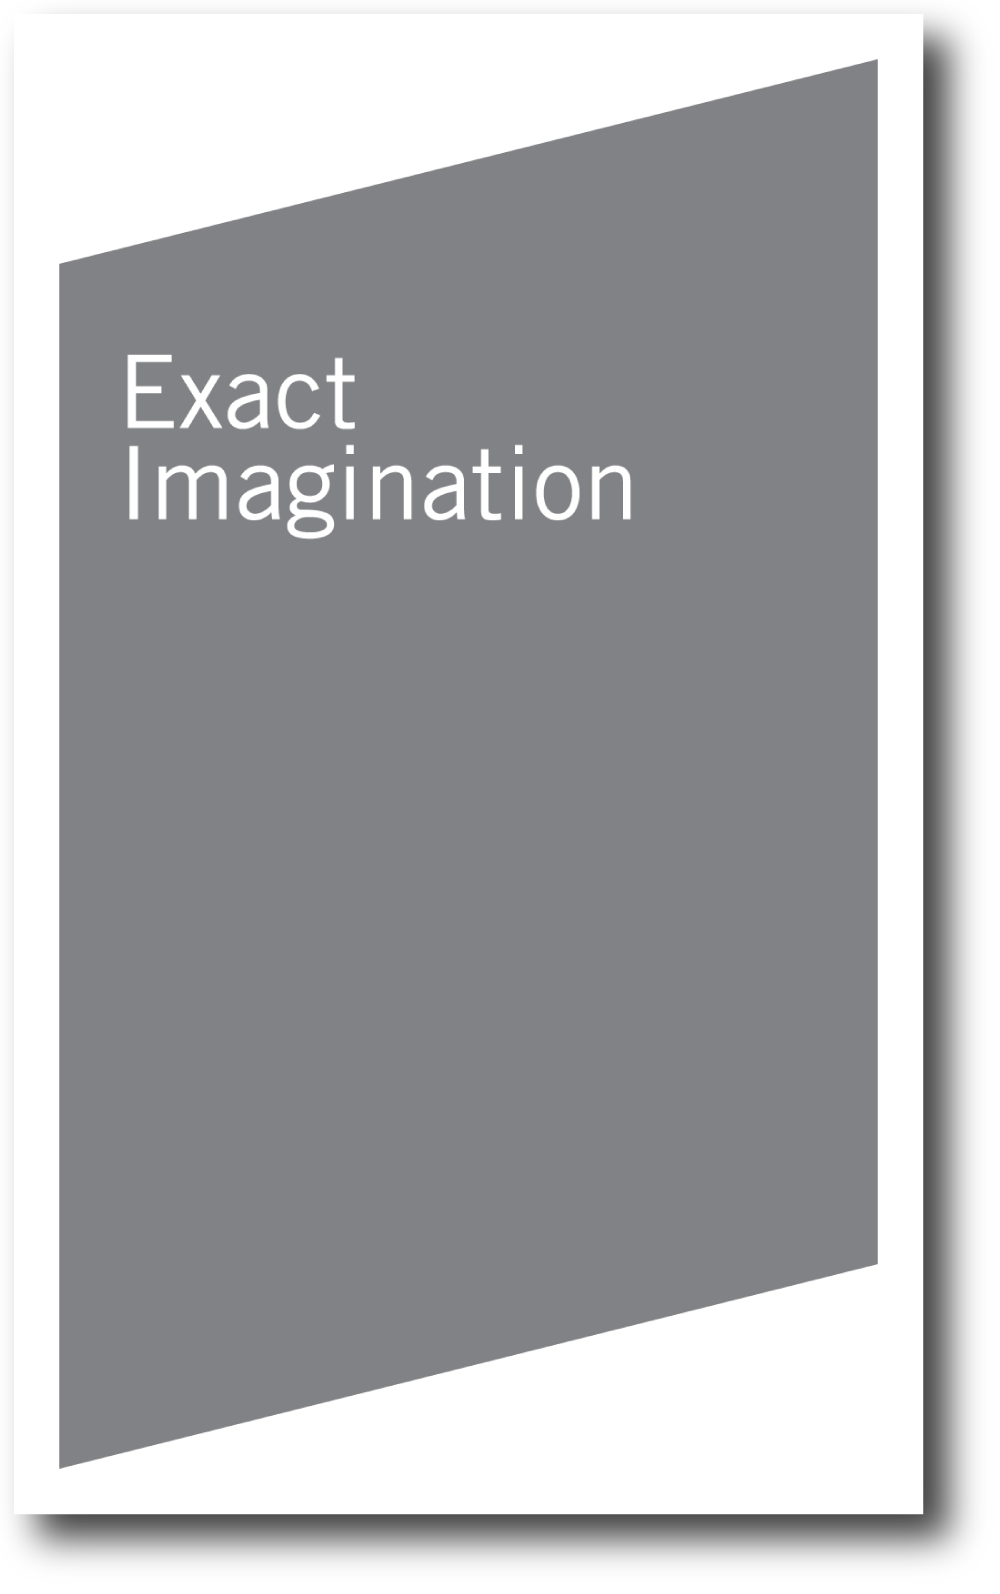   Exact Imagination , 2008, 60 pages,&nbsp;8.25 x 5 inches. 